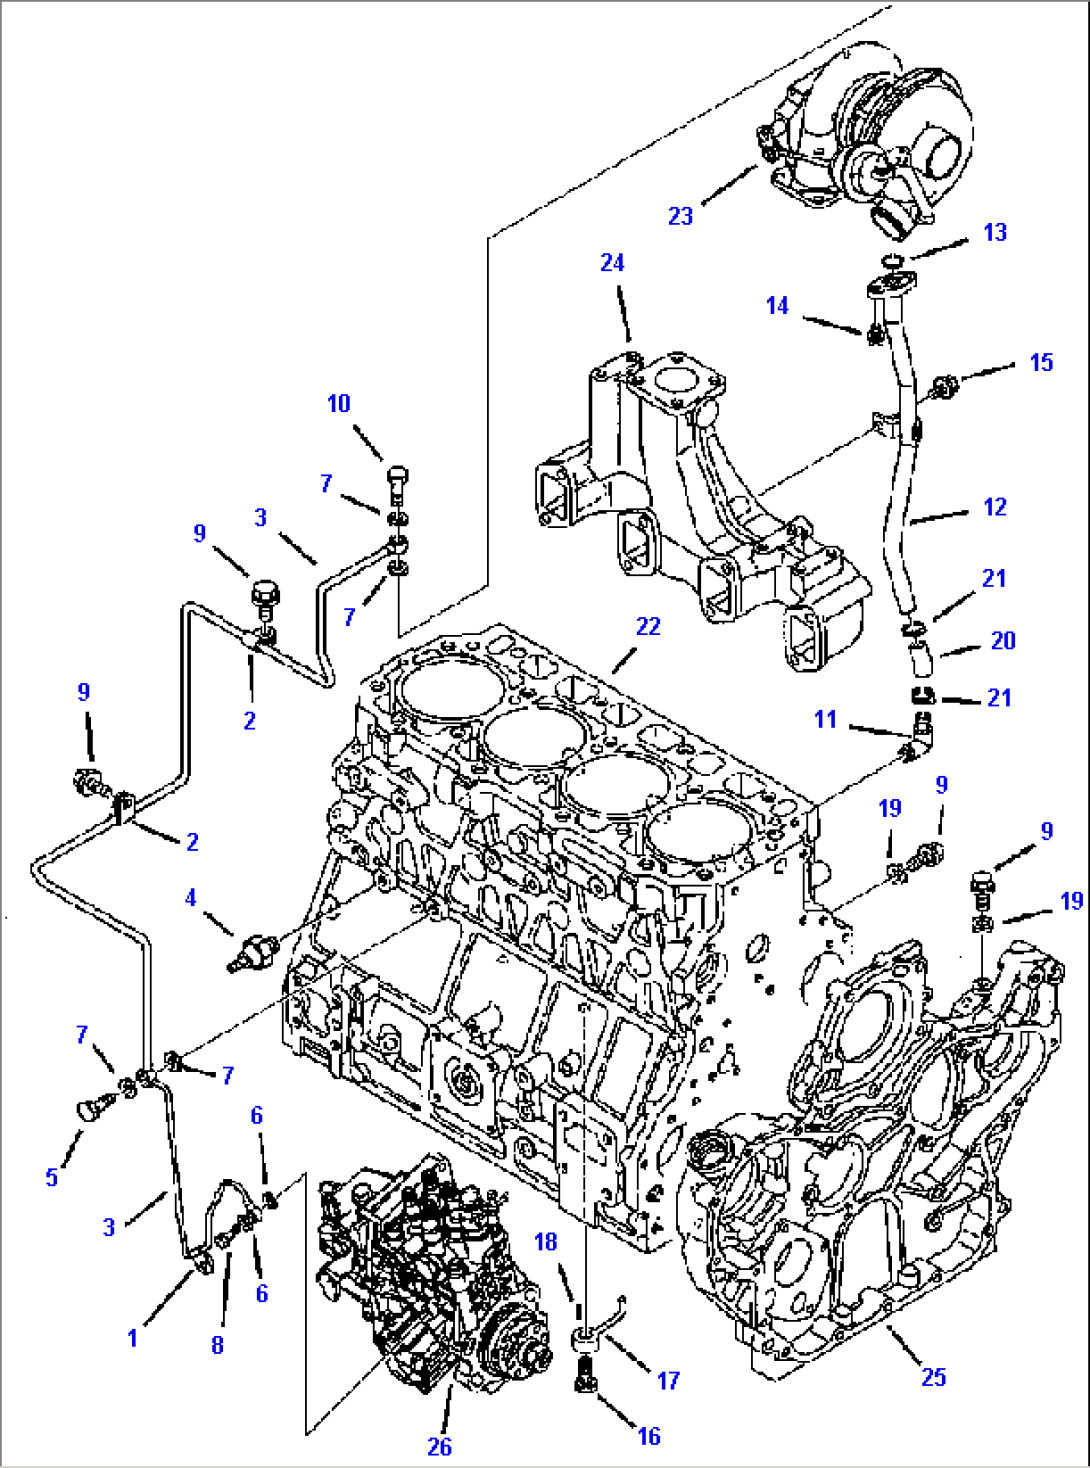 FIG. A0121-01A1 ENGINE - TURBO LUBE LINES